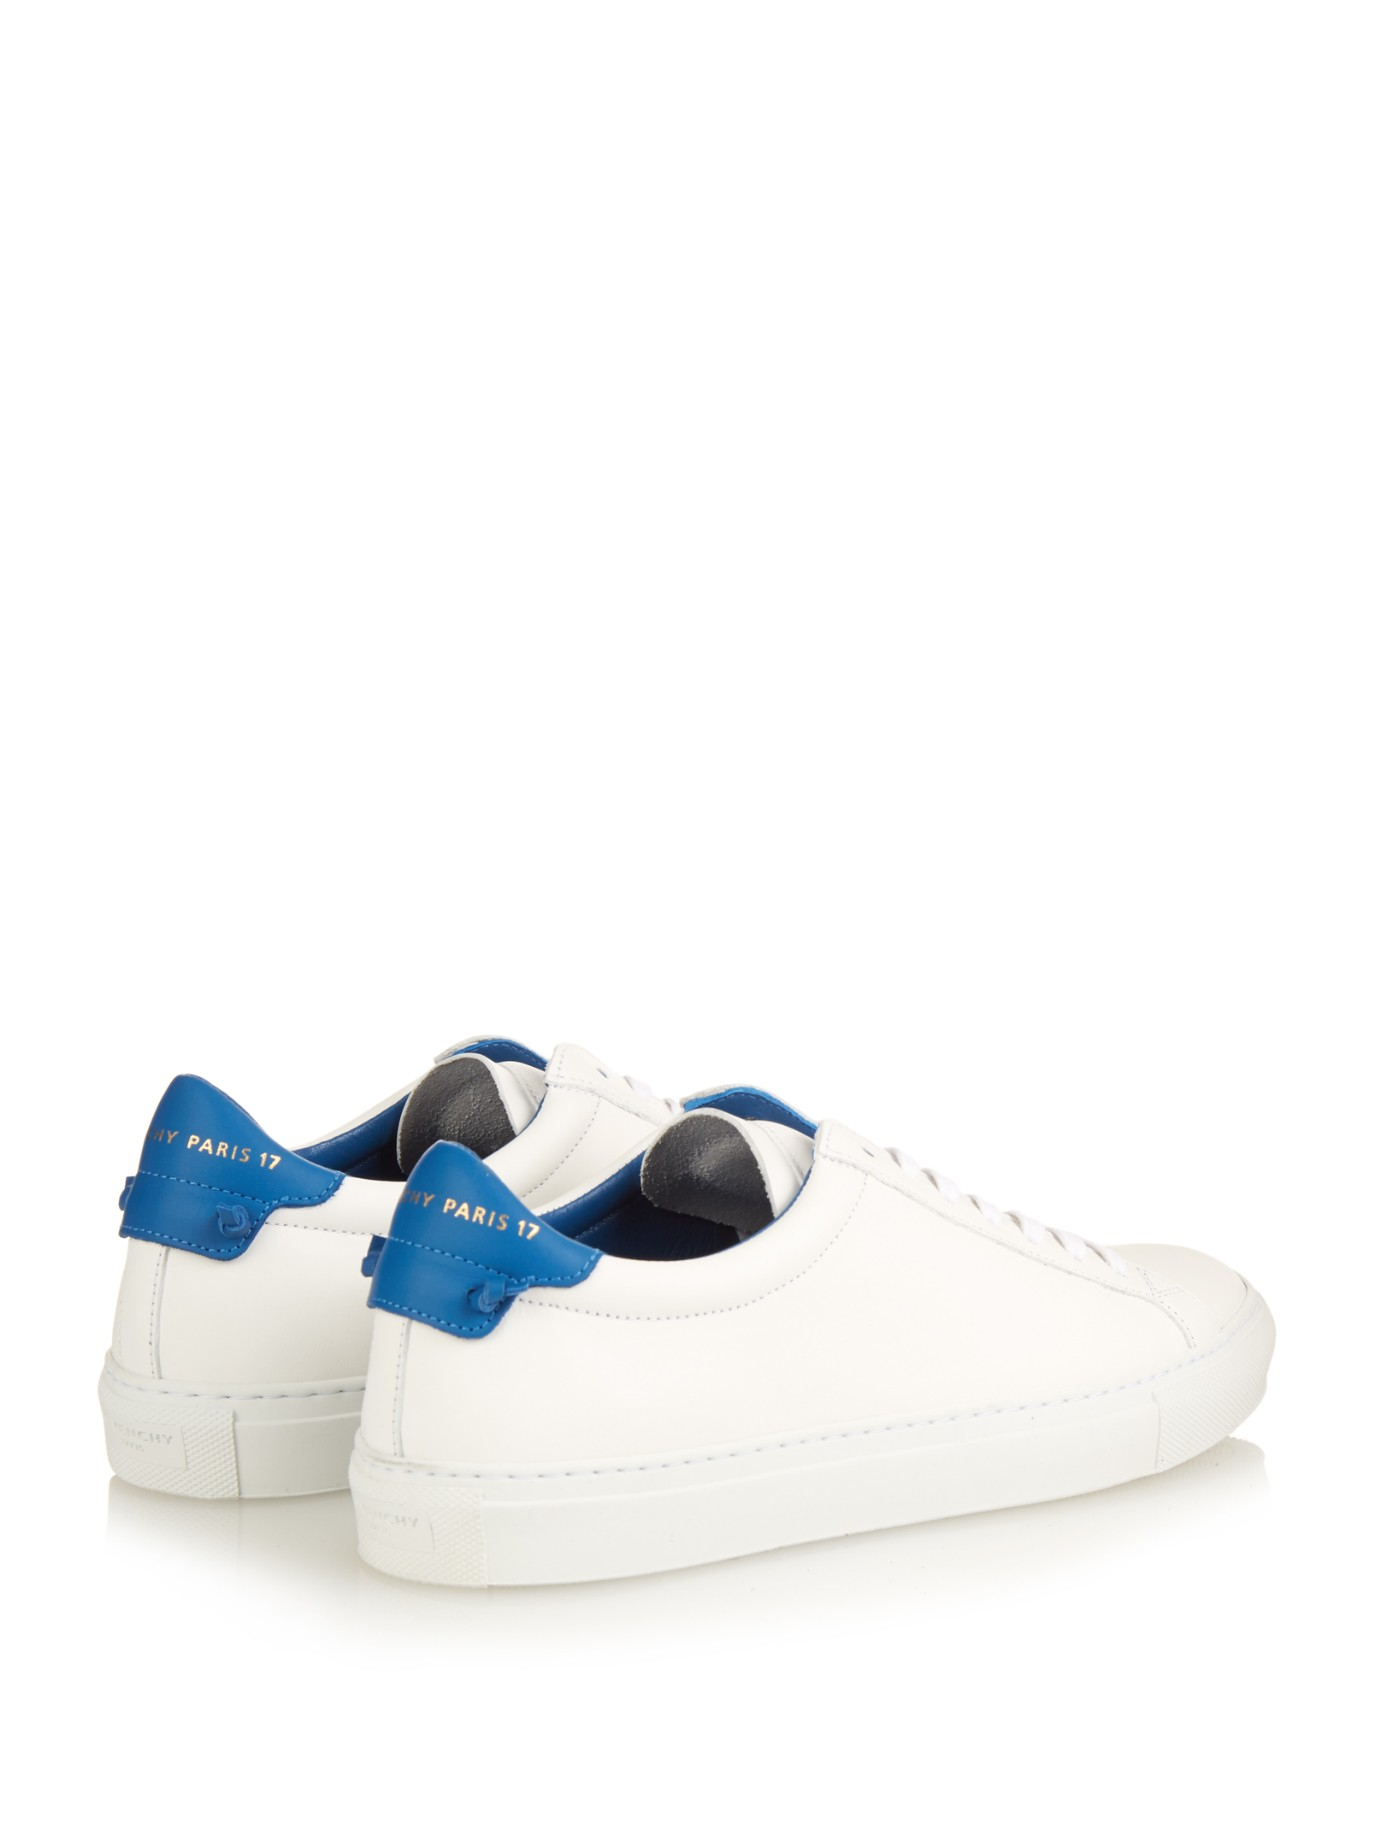 Givenchy Urban Street Low-top Leather Trainers in Blue | Lyst